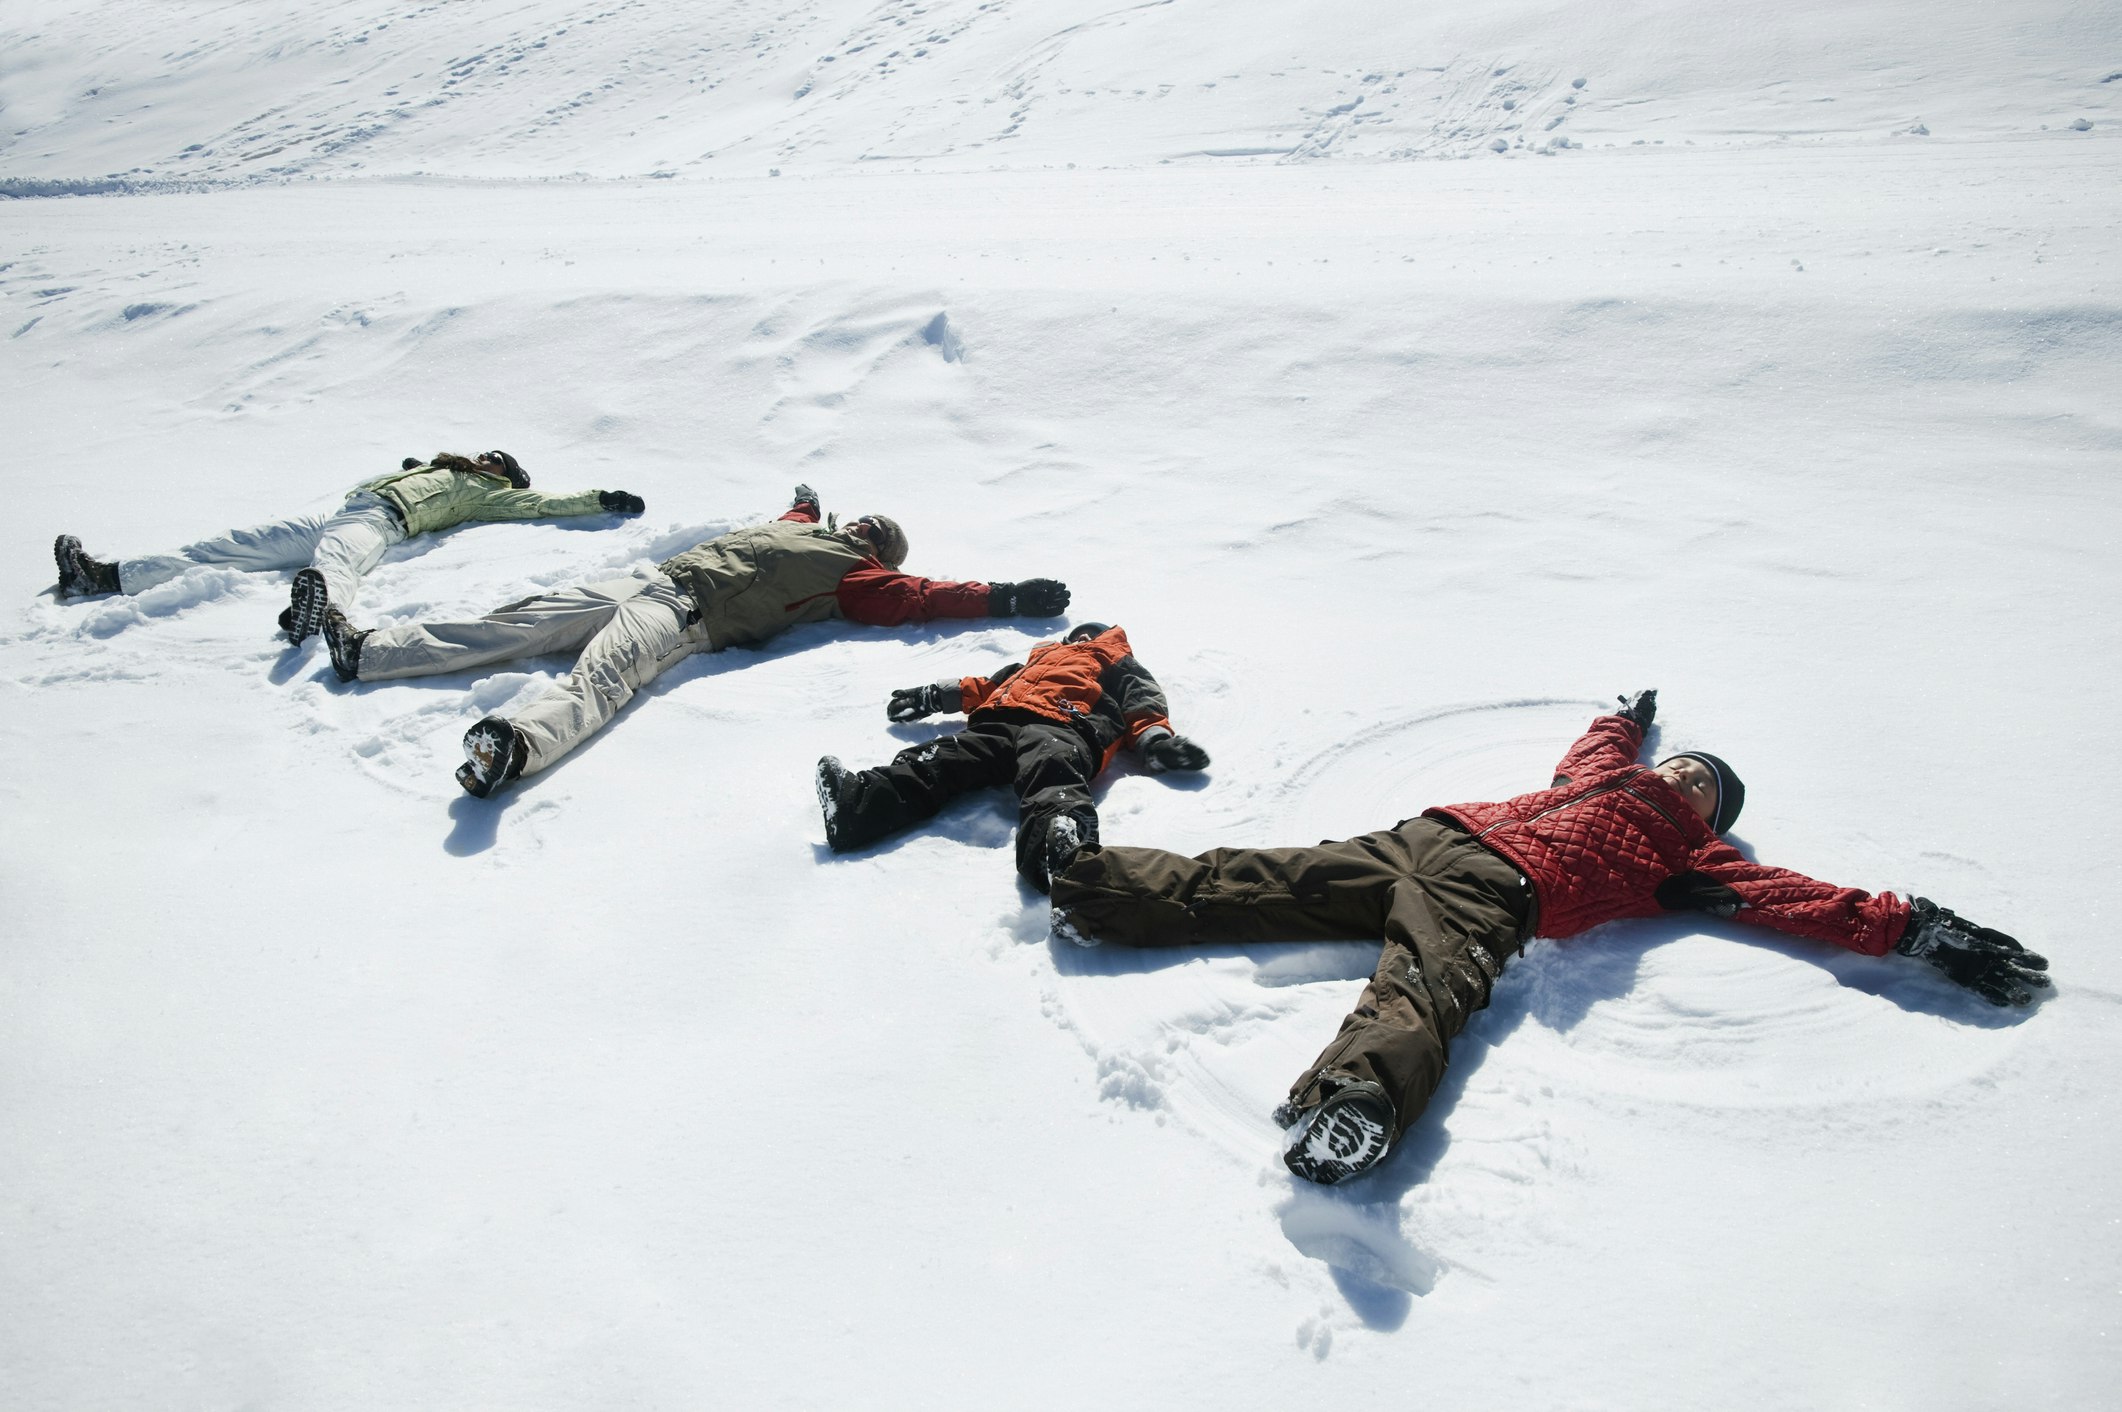 Family making snow angels